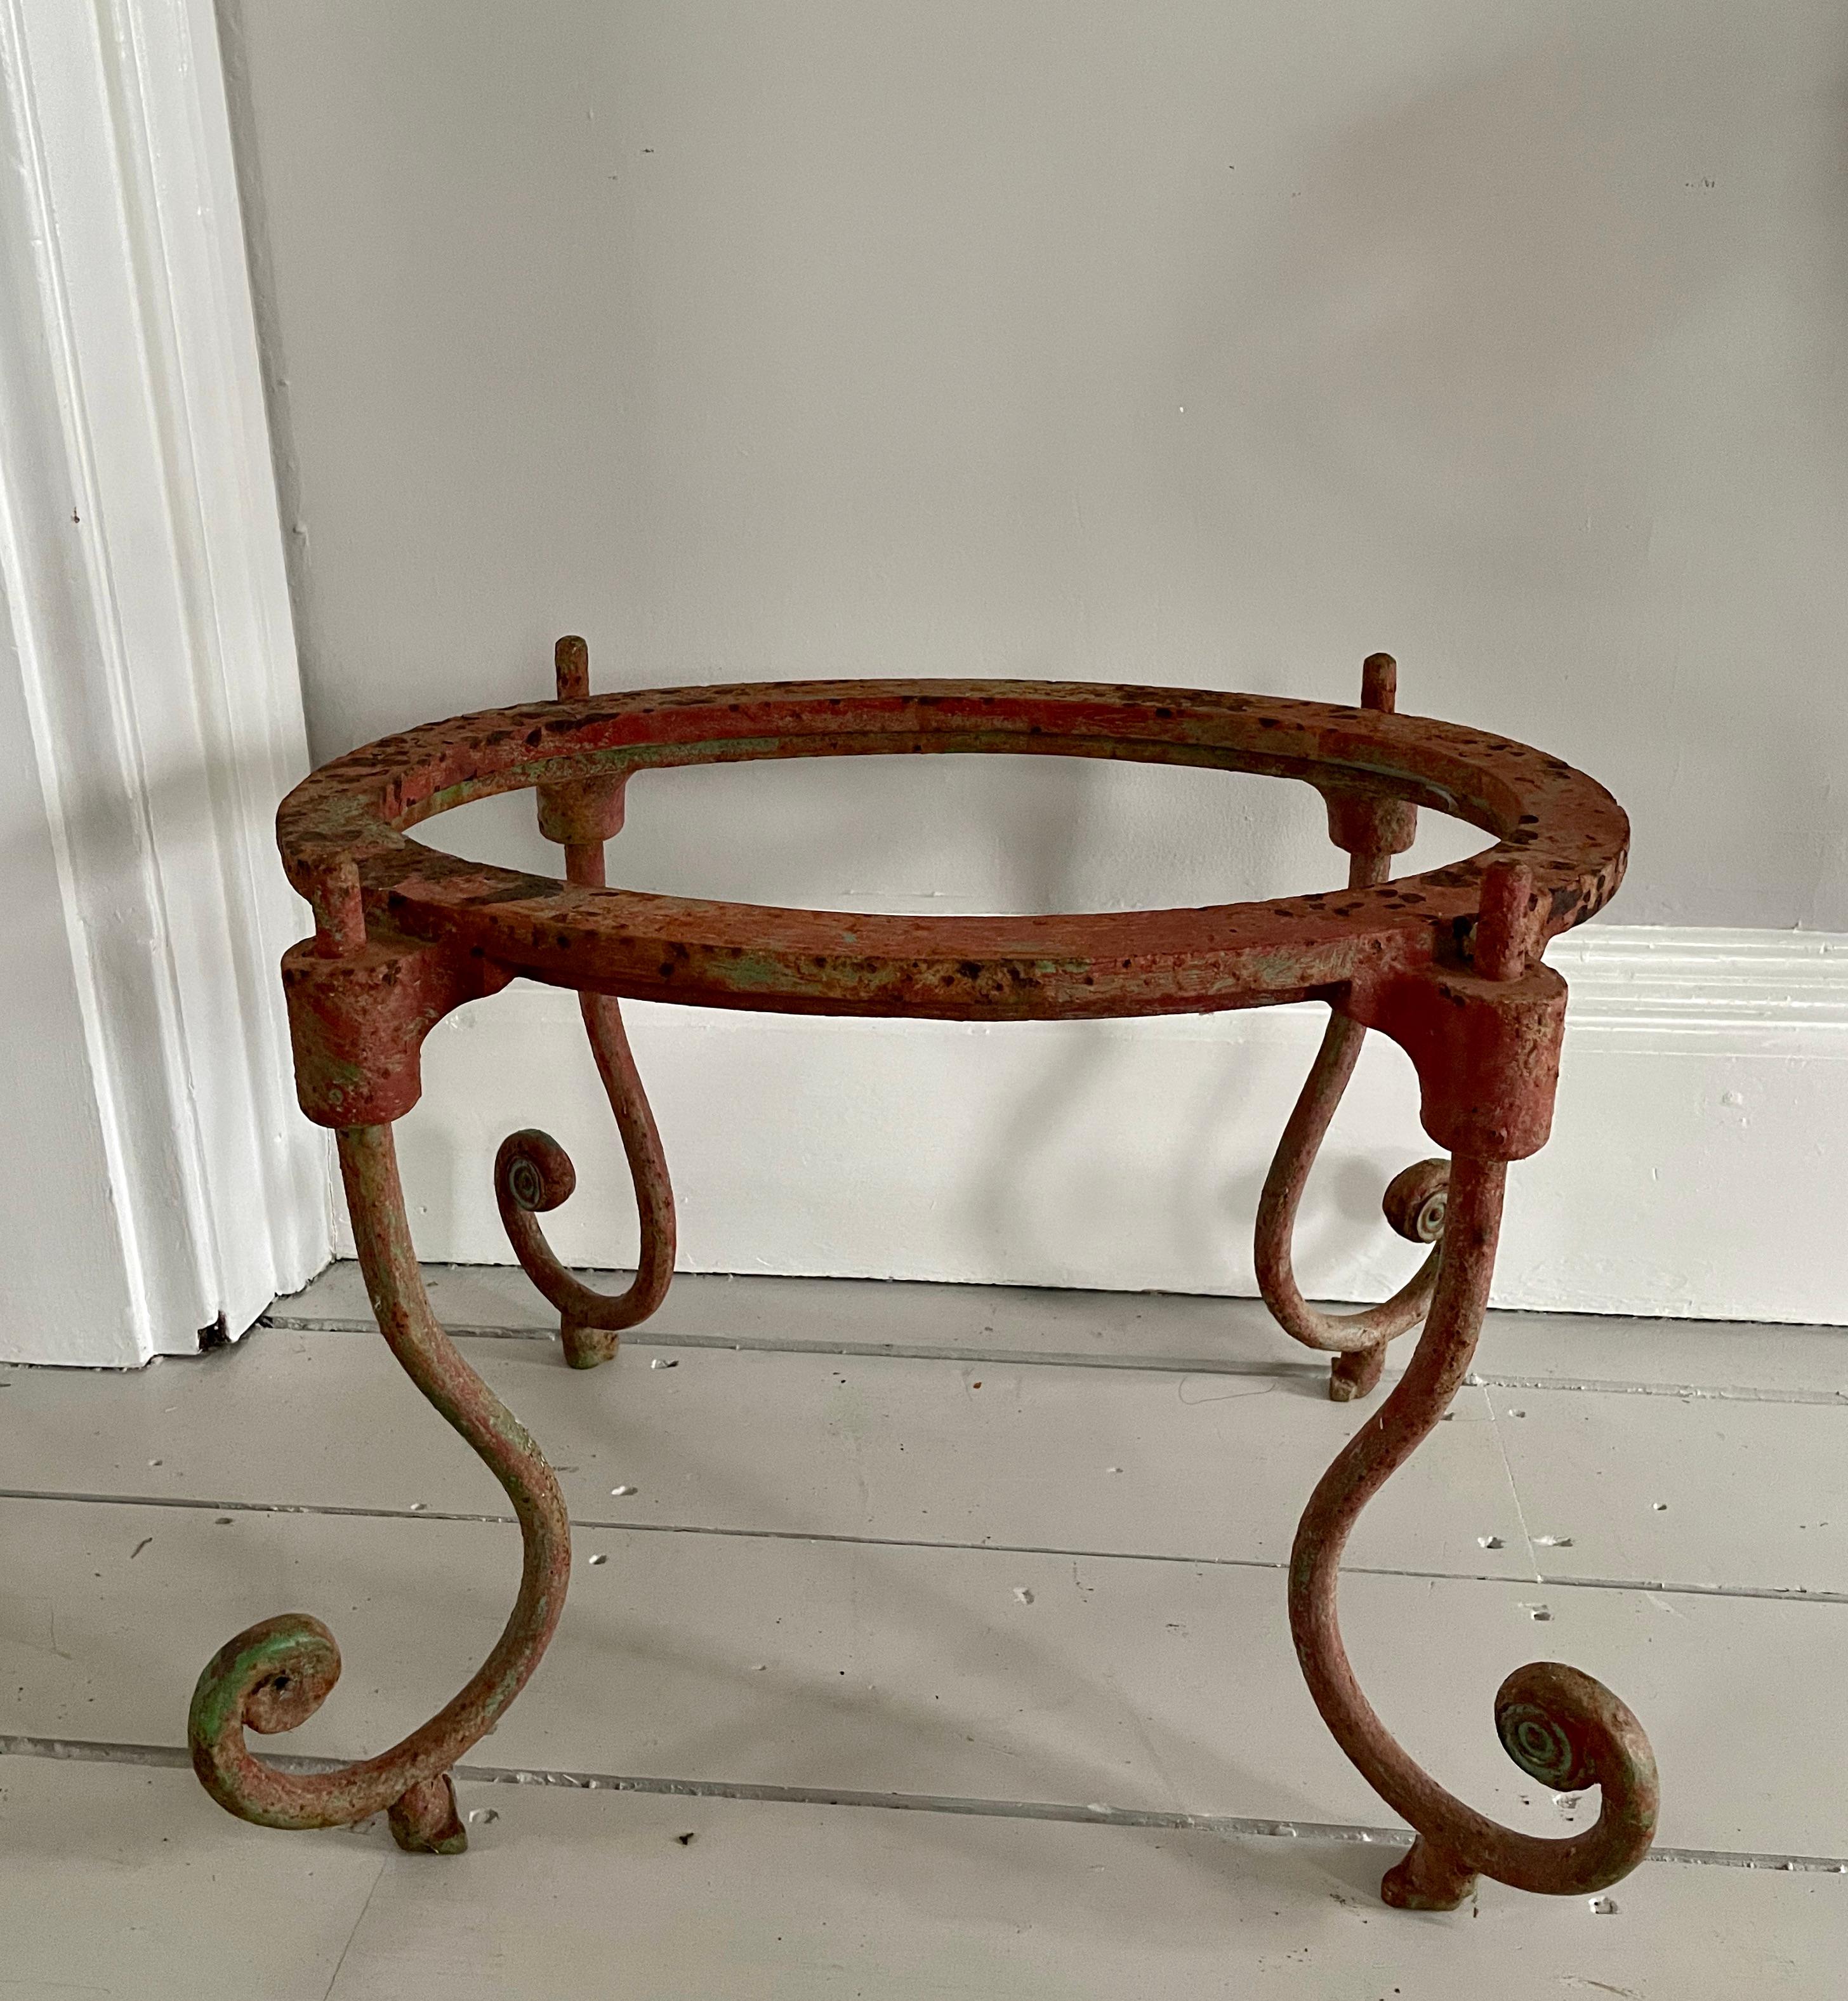 Small 19th Century American Oval Cast and Wrought Iron Table Base In Good Condition For Sale In Woodbury, CT